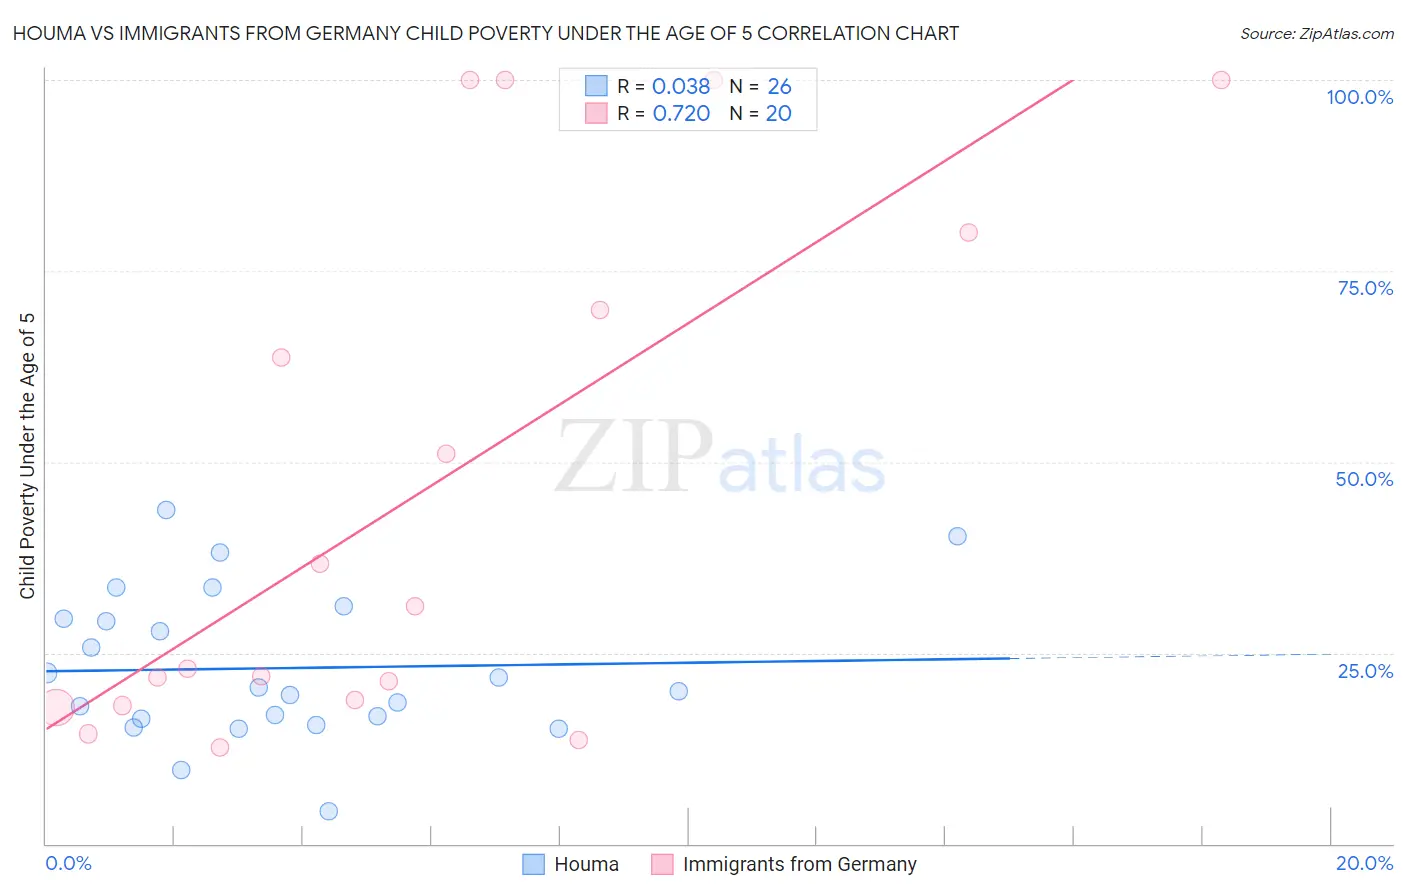 Houma vs Immigrants from Germany Child Poverty Under the Age of 5